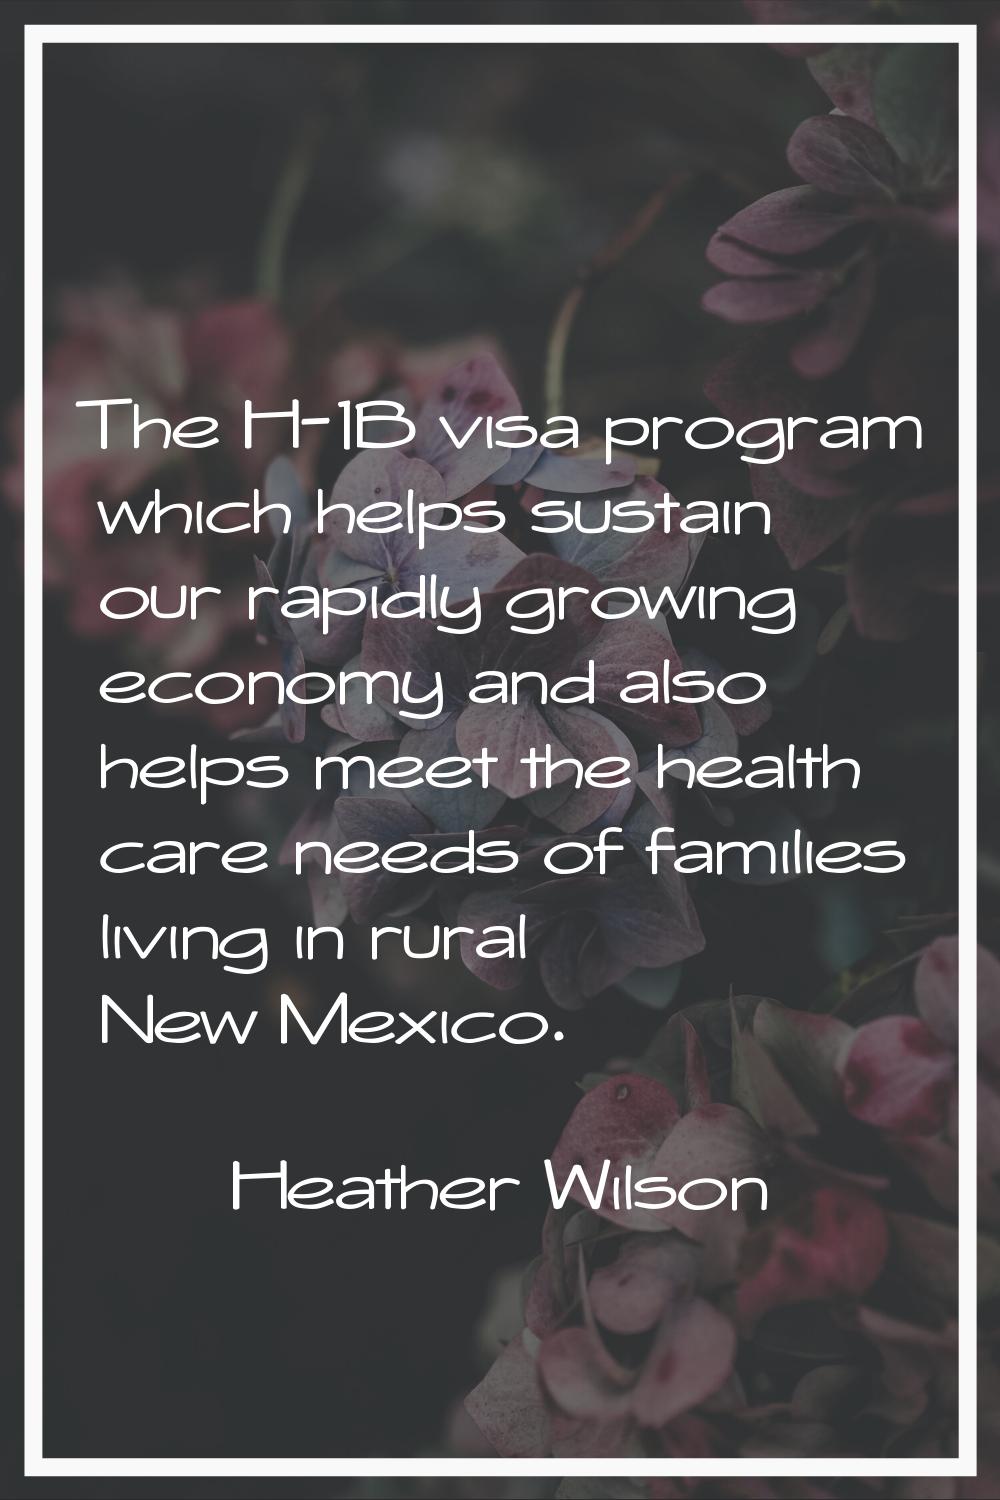 The H-1B visa program which helps sustain our rapidly growing economy and also helps meet the healt